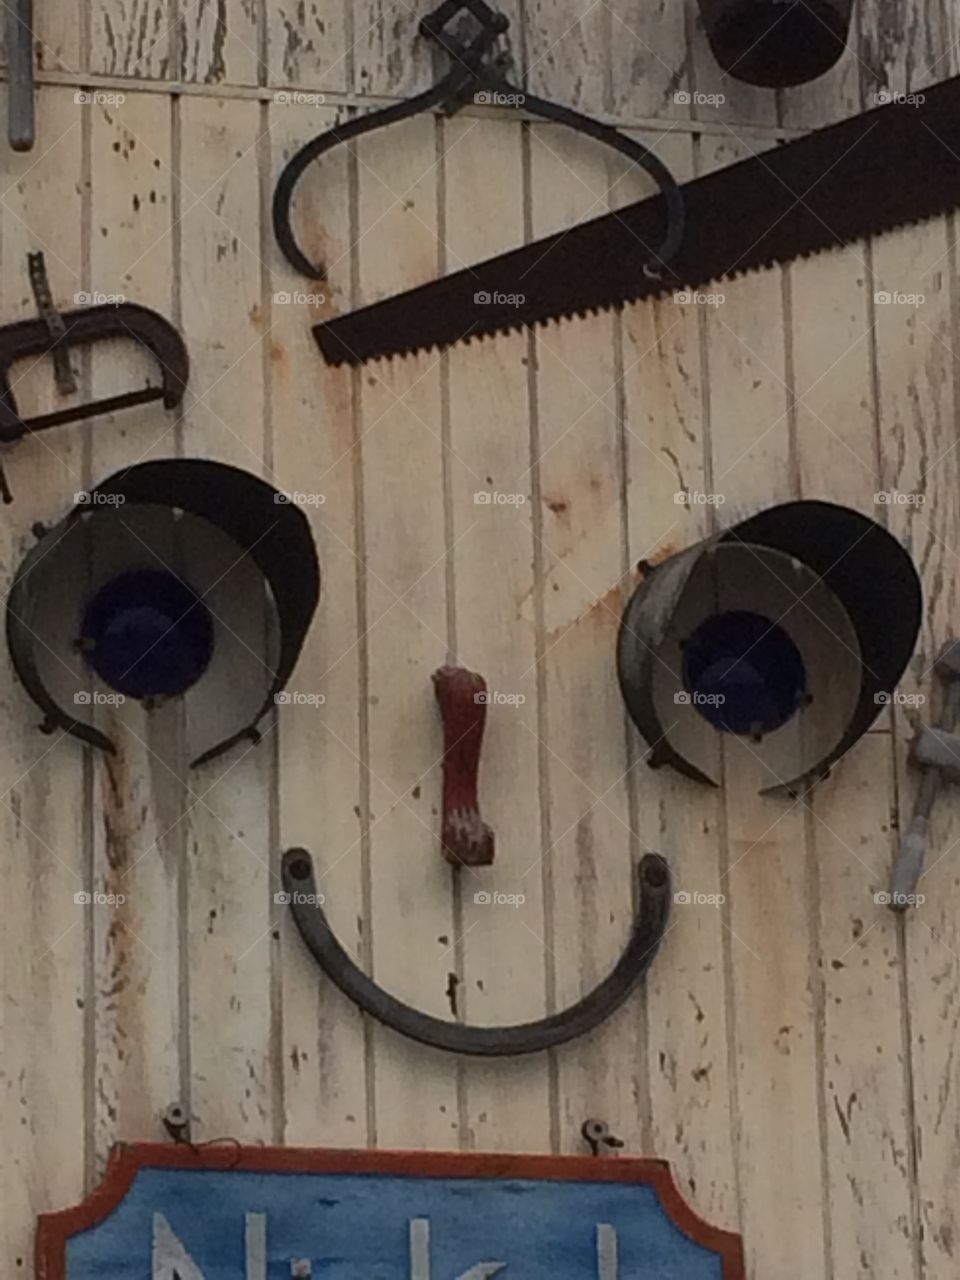 Smile out of metal parts